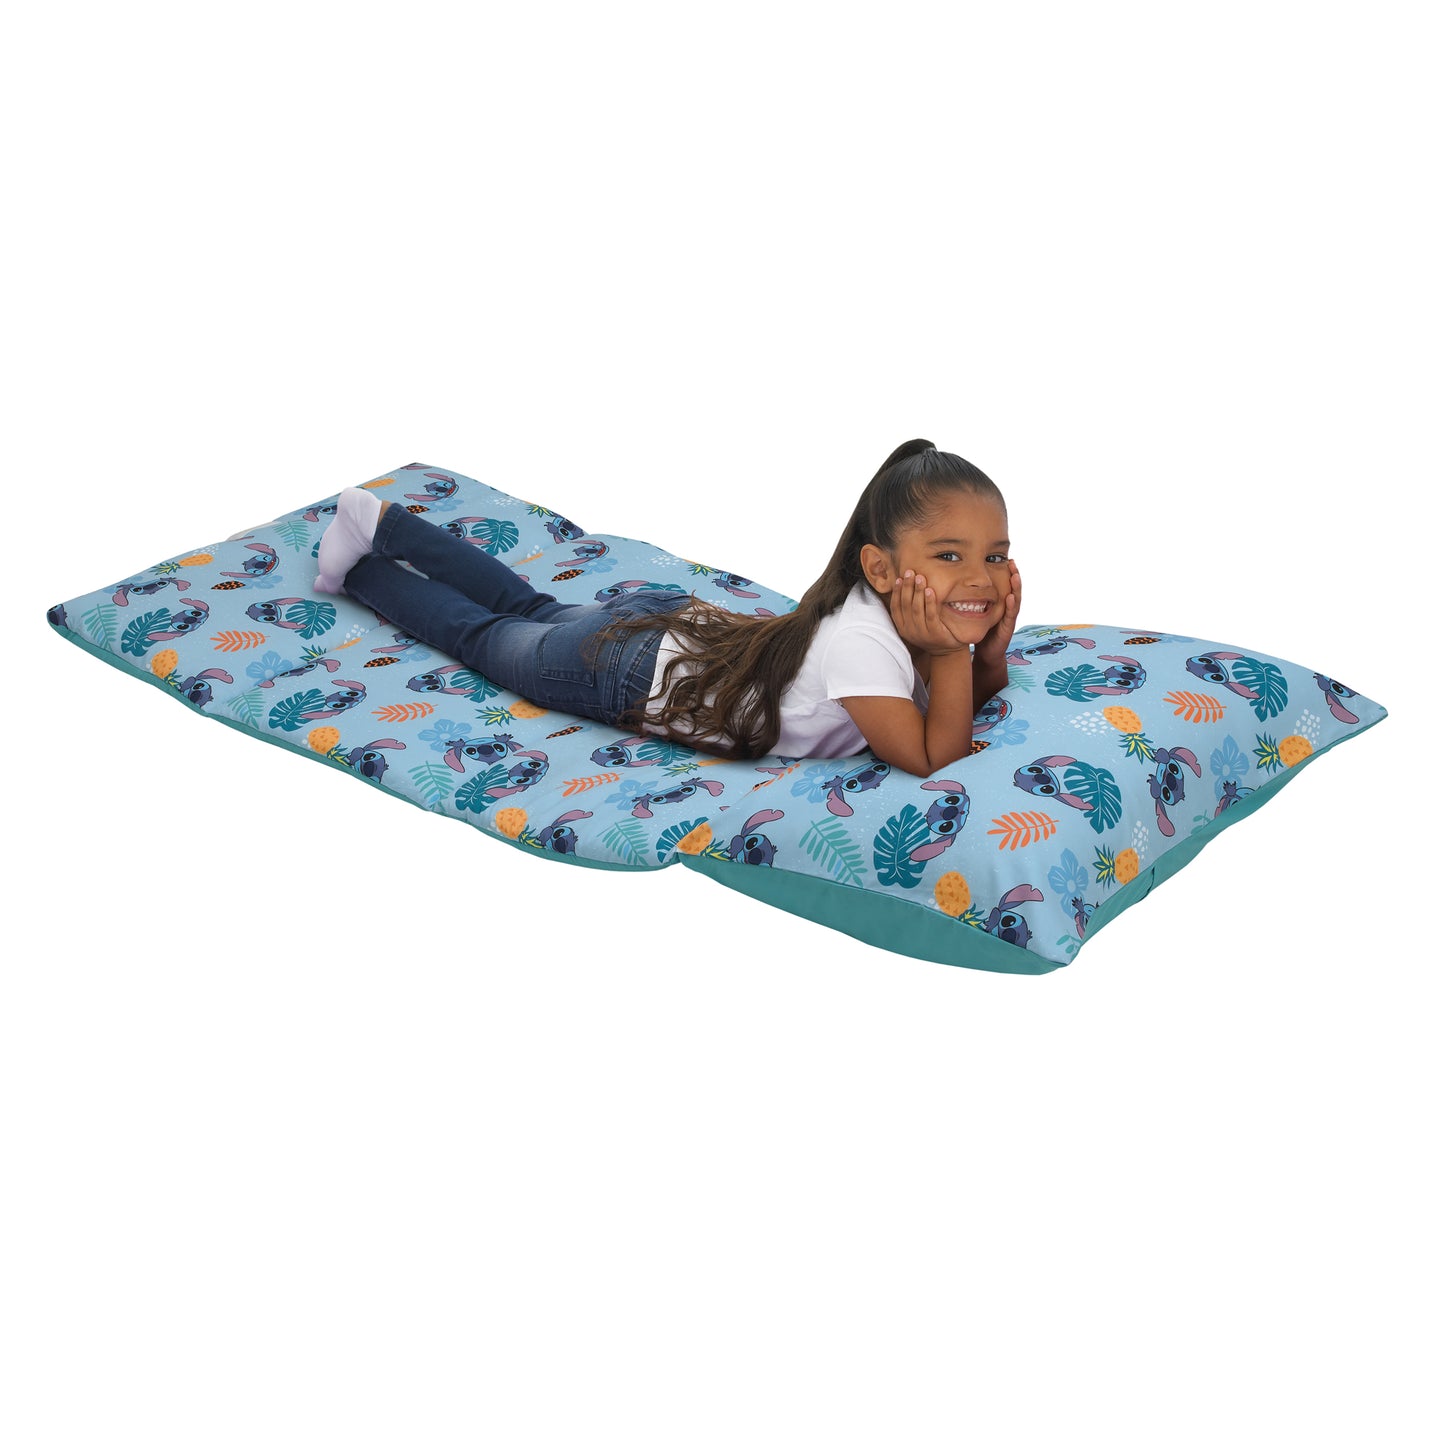 Disney Stitch Weird But Cute Blue, Teal and Coral Deluxe Easy Fold Toddler Nap Mat